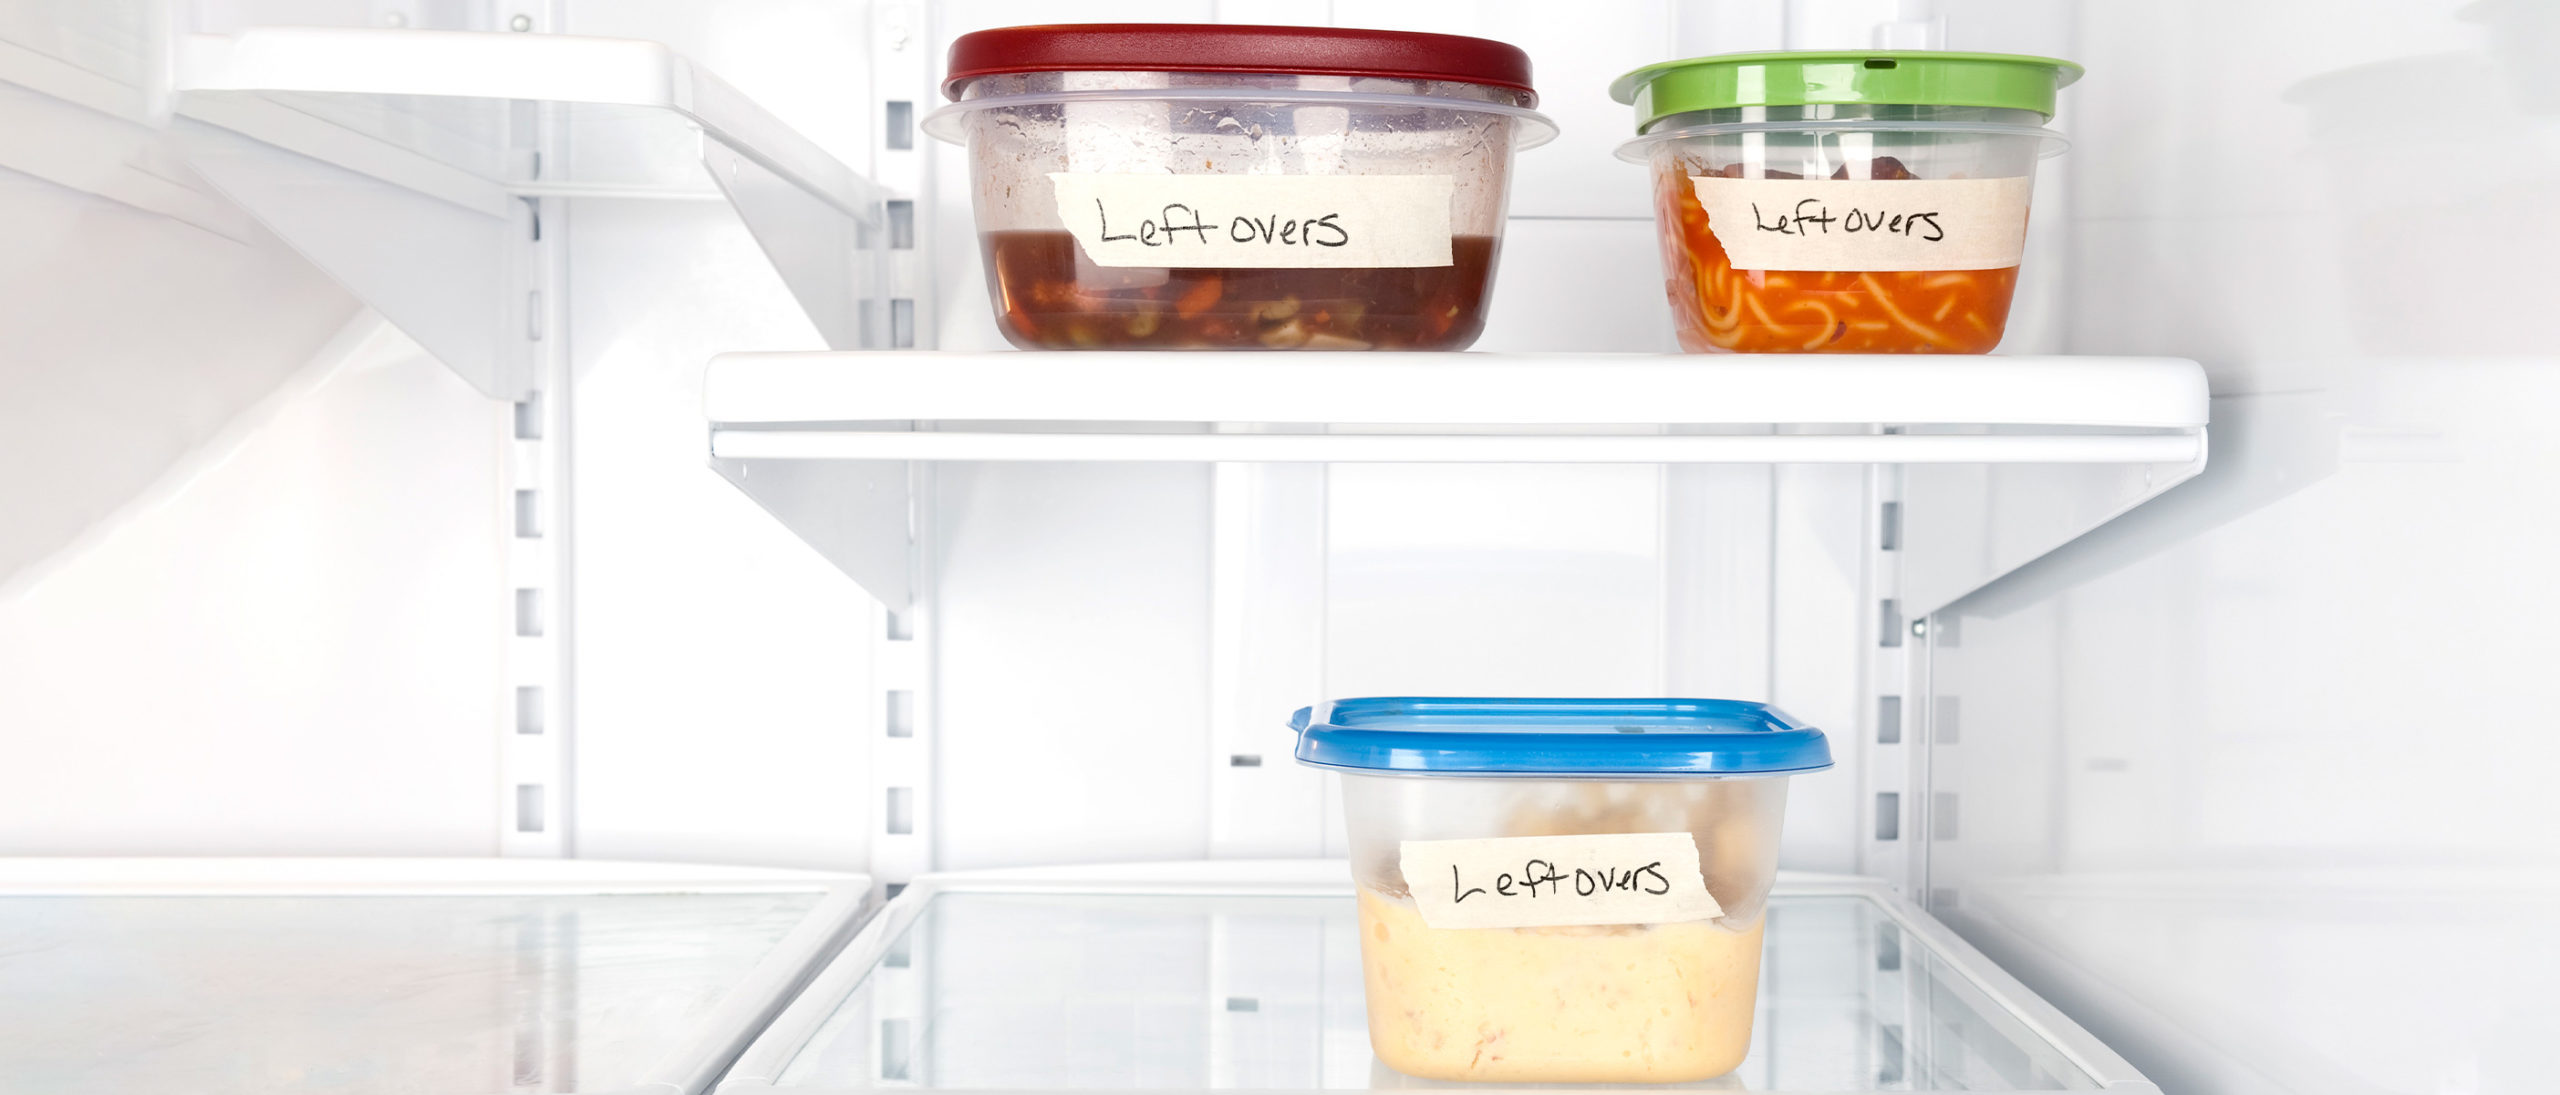 How to Safely Store and Consume Leftovers